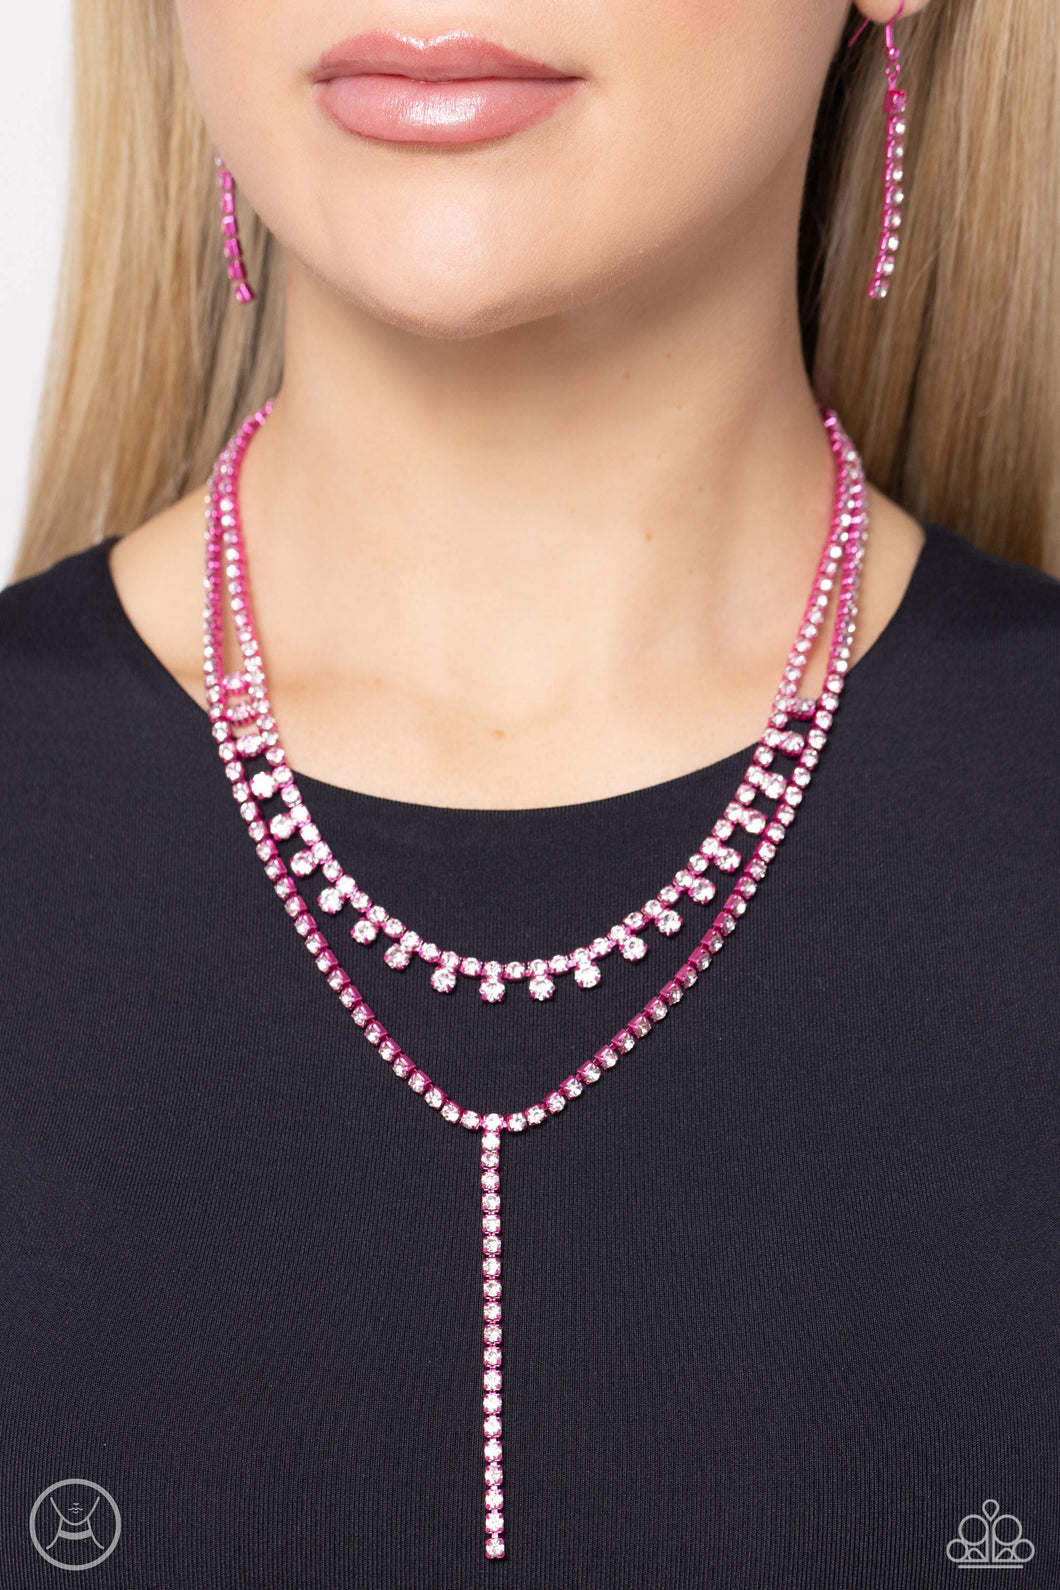 Paparazzi Accessories: Champagne Night - Pink Choker Necklace